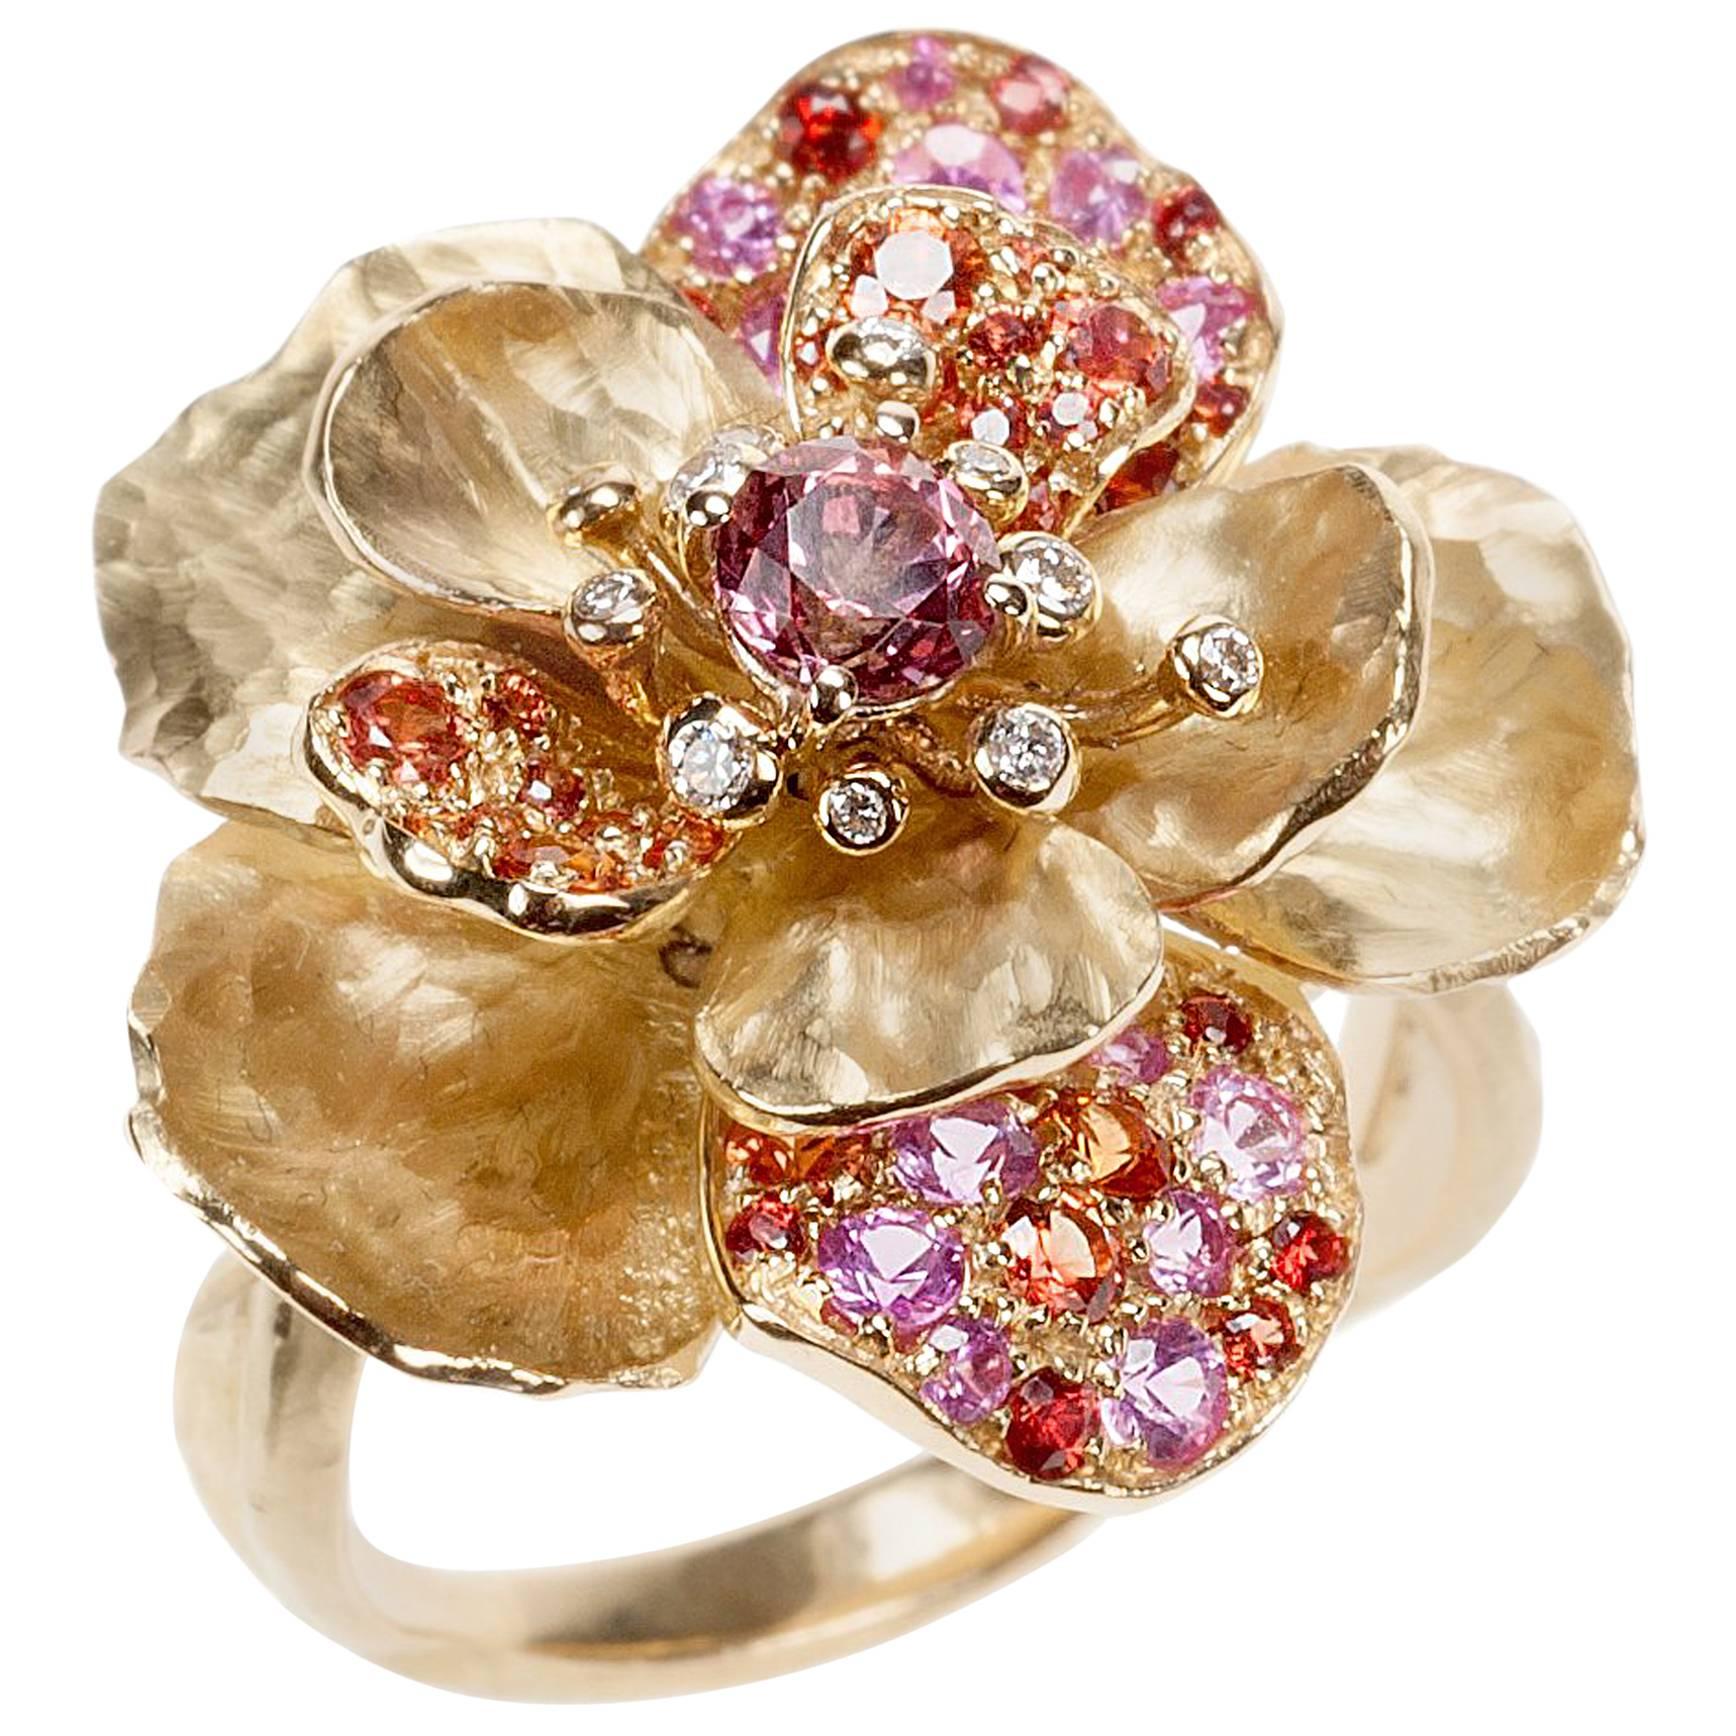 Vendorafa Sapphire and Ruby Flower Ring in 18 Karat Yellow Gold For Sale